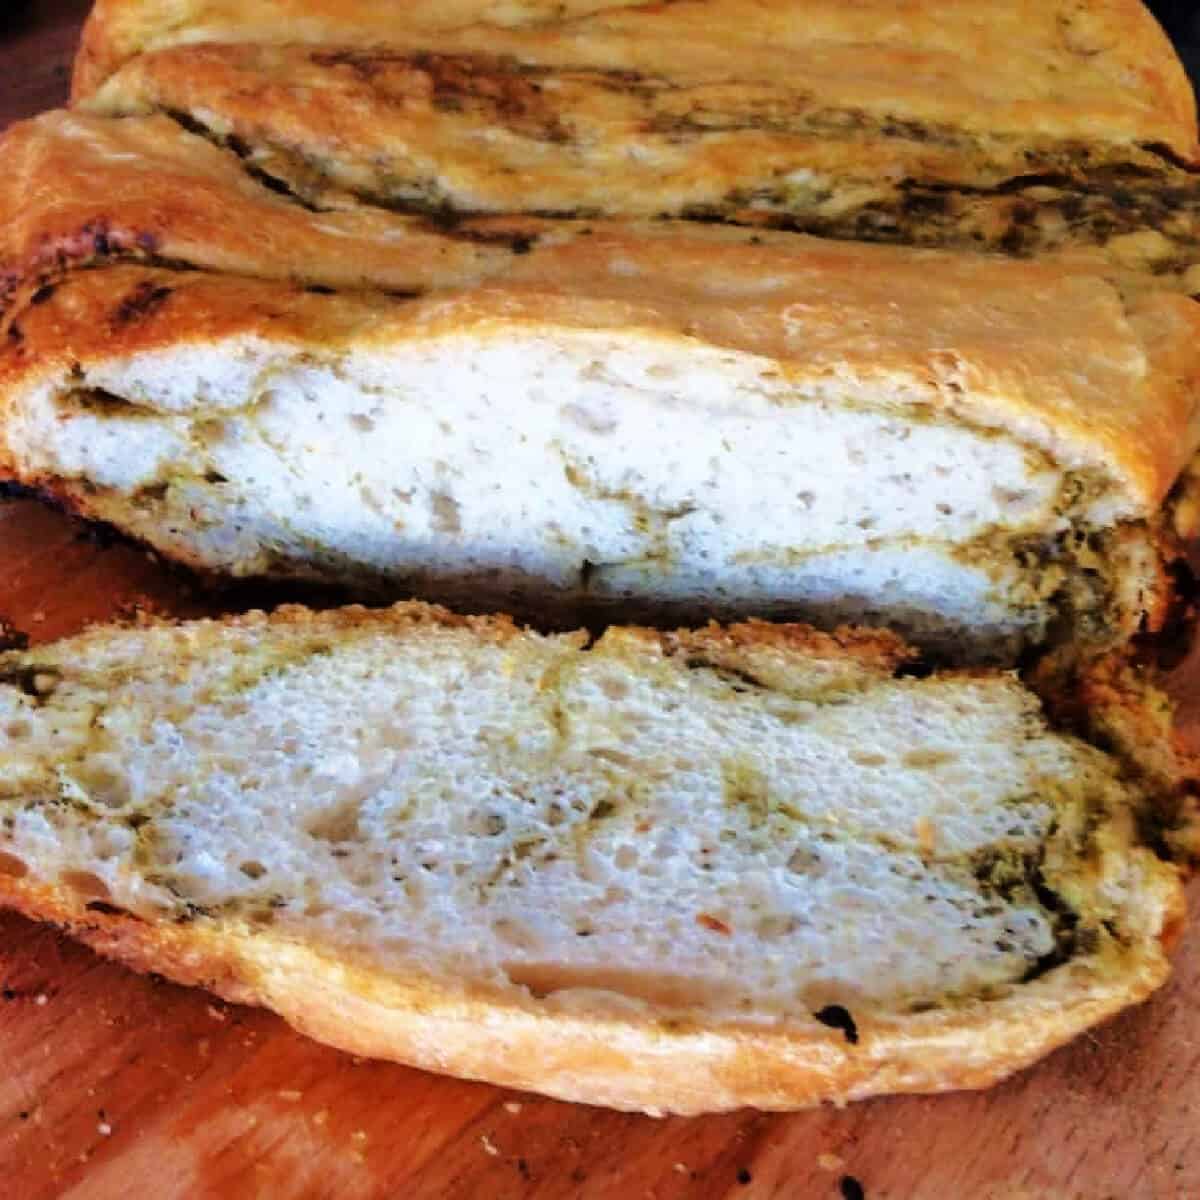 Bread rippled with pesto, cut open to show the interior of the loaf.